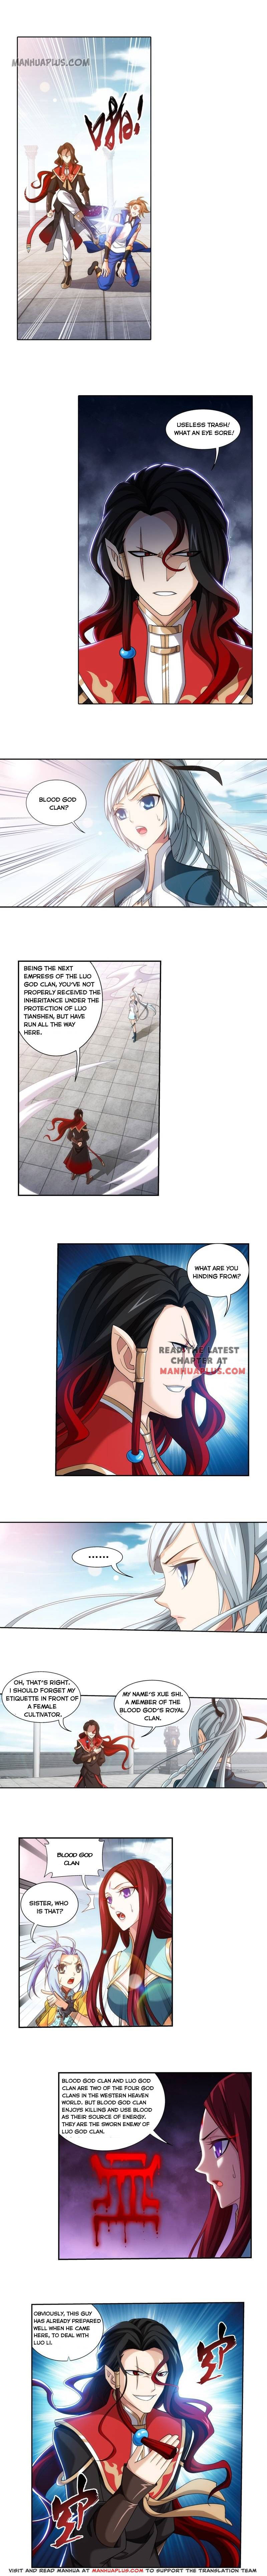 The Great Ruler Chapter 182 page 2